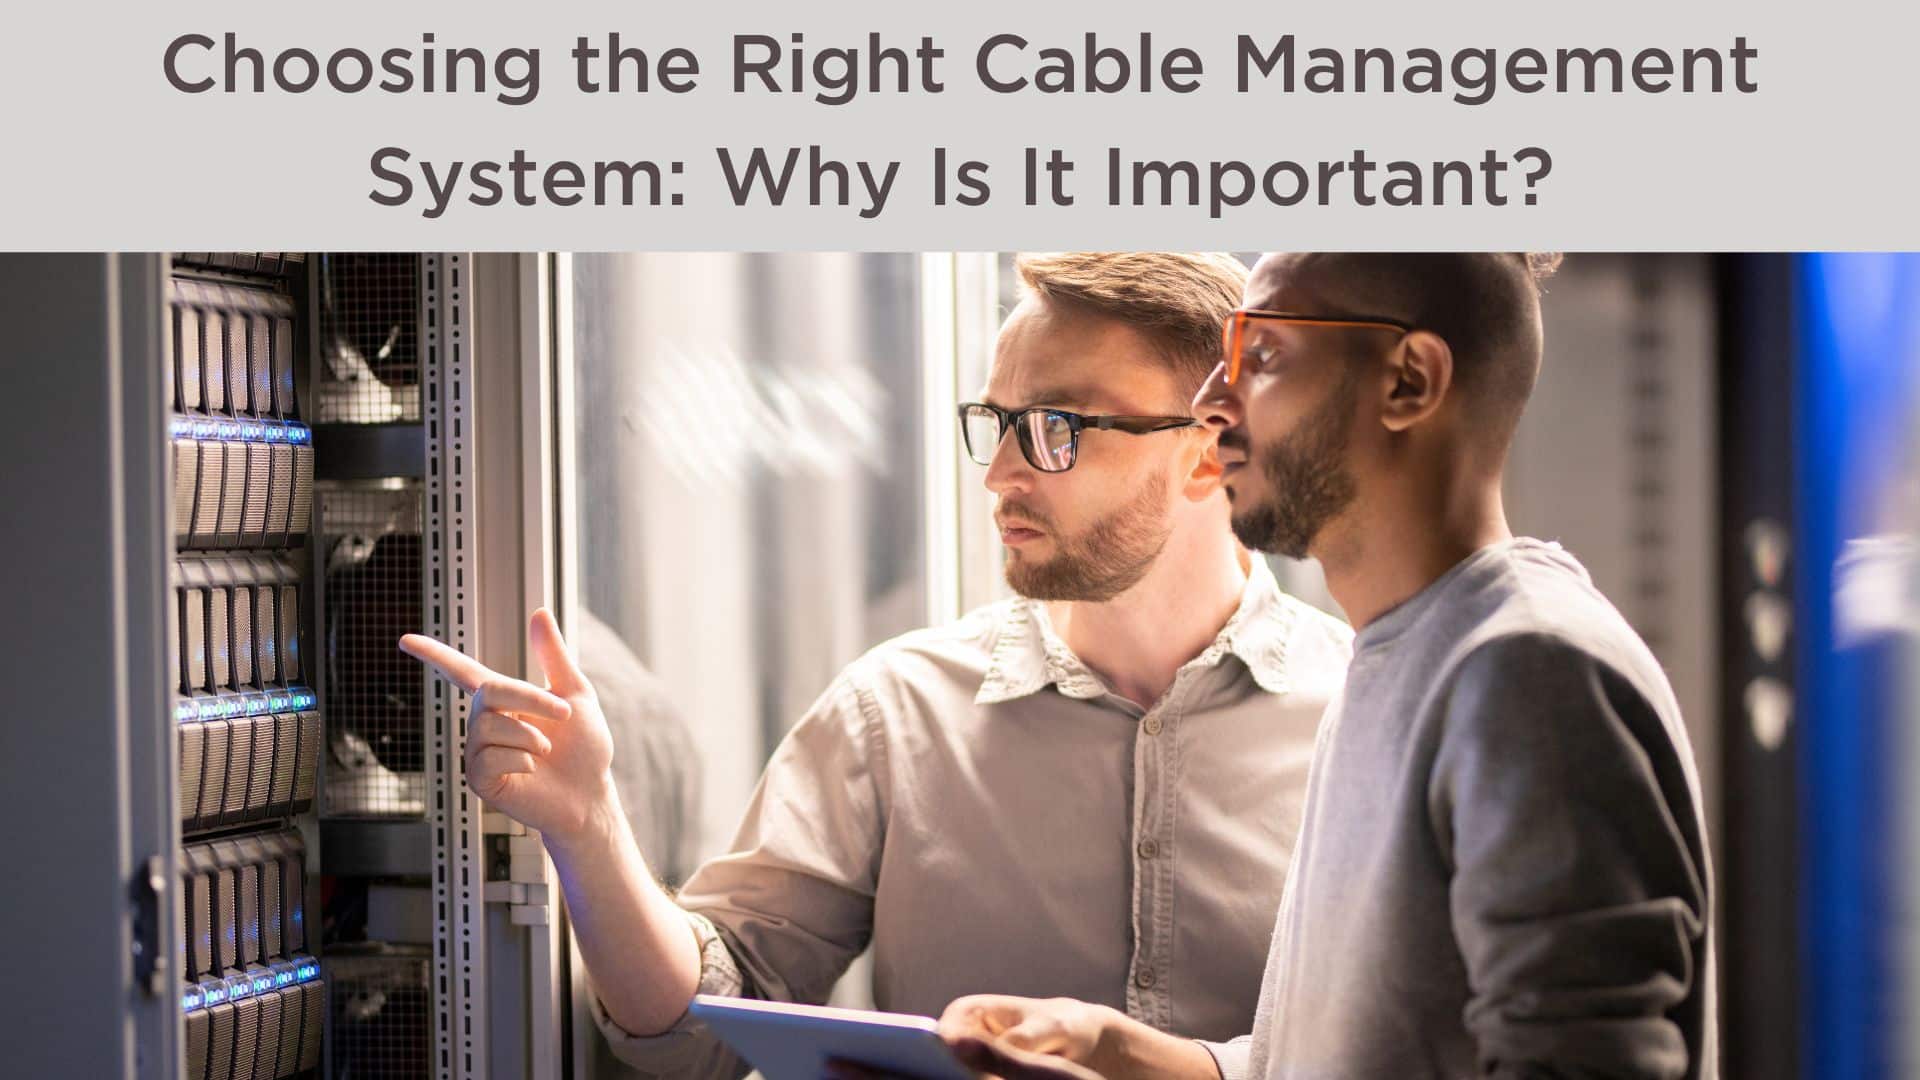 Choosing the Right Cable Management System: Why Is It Important?